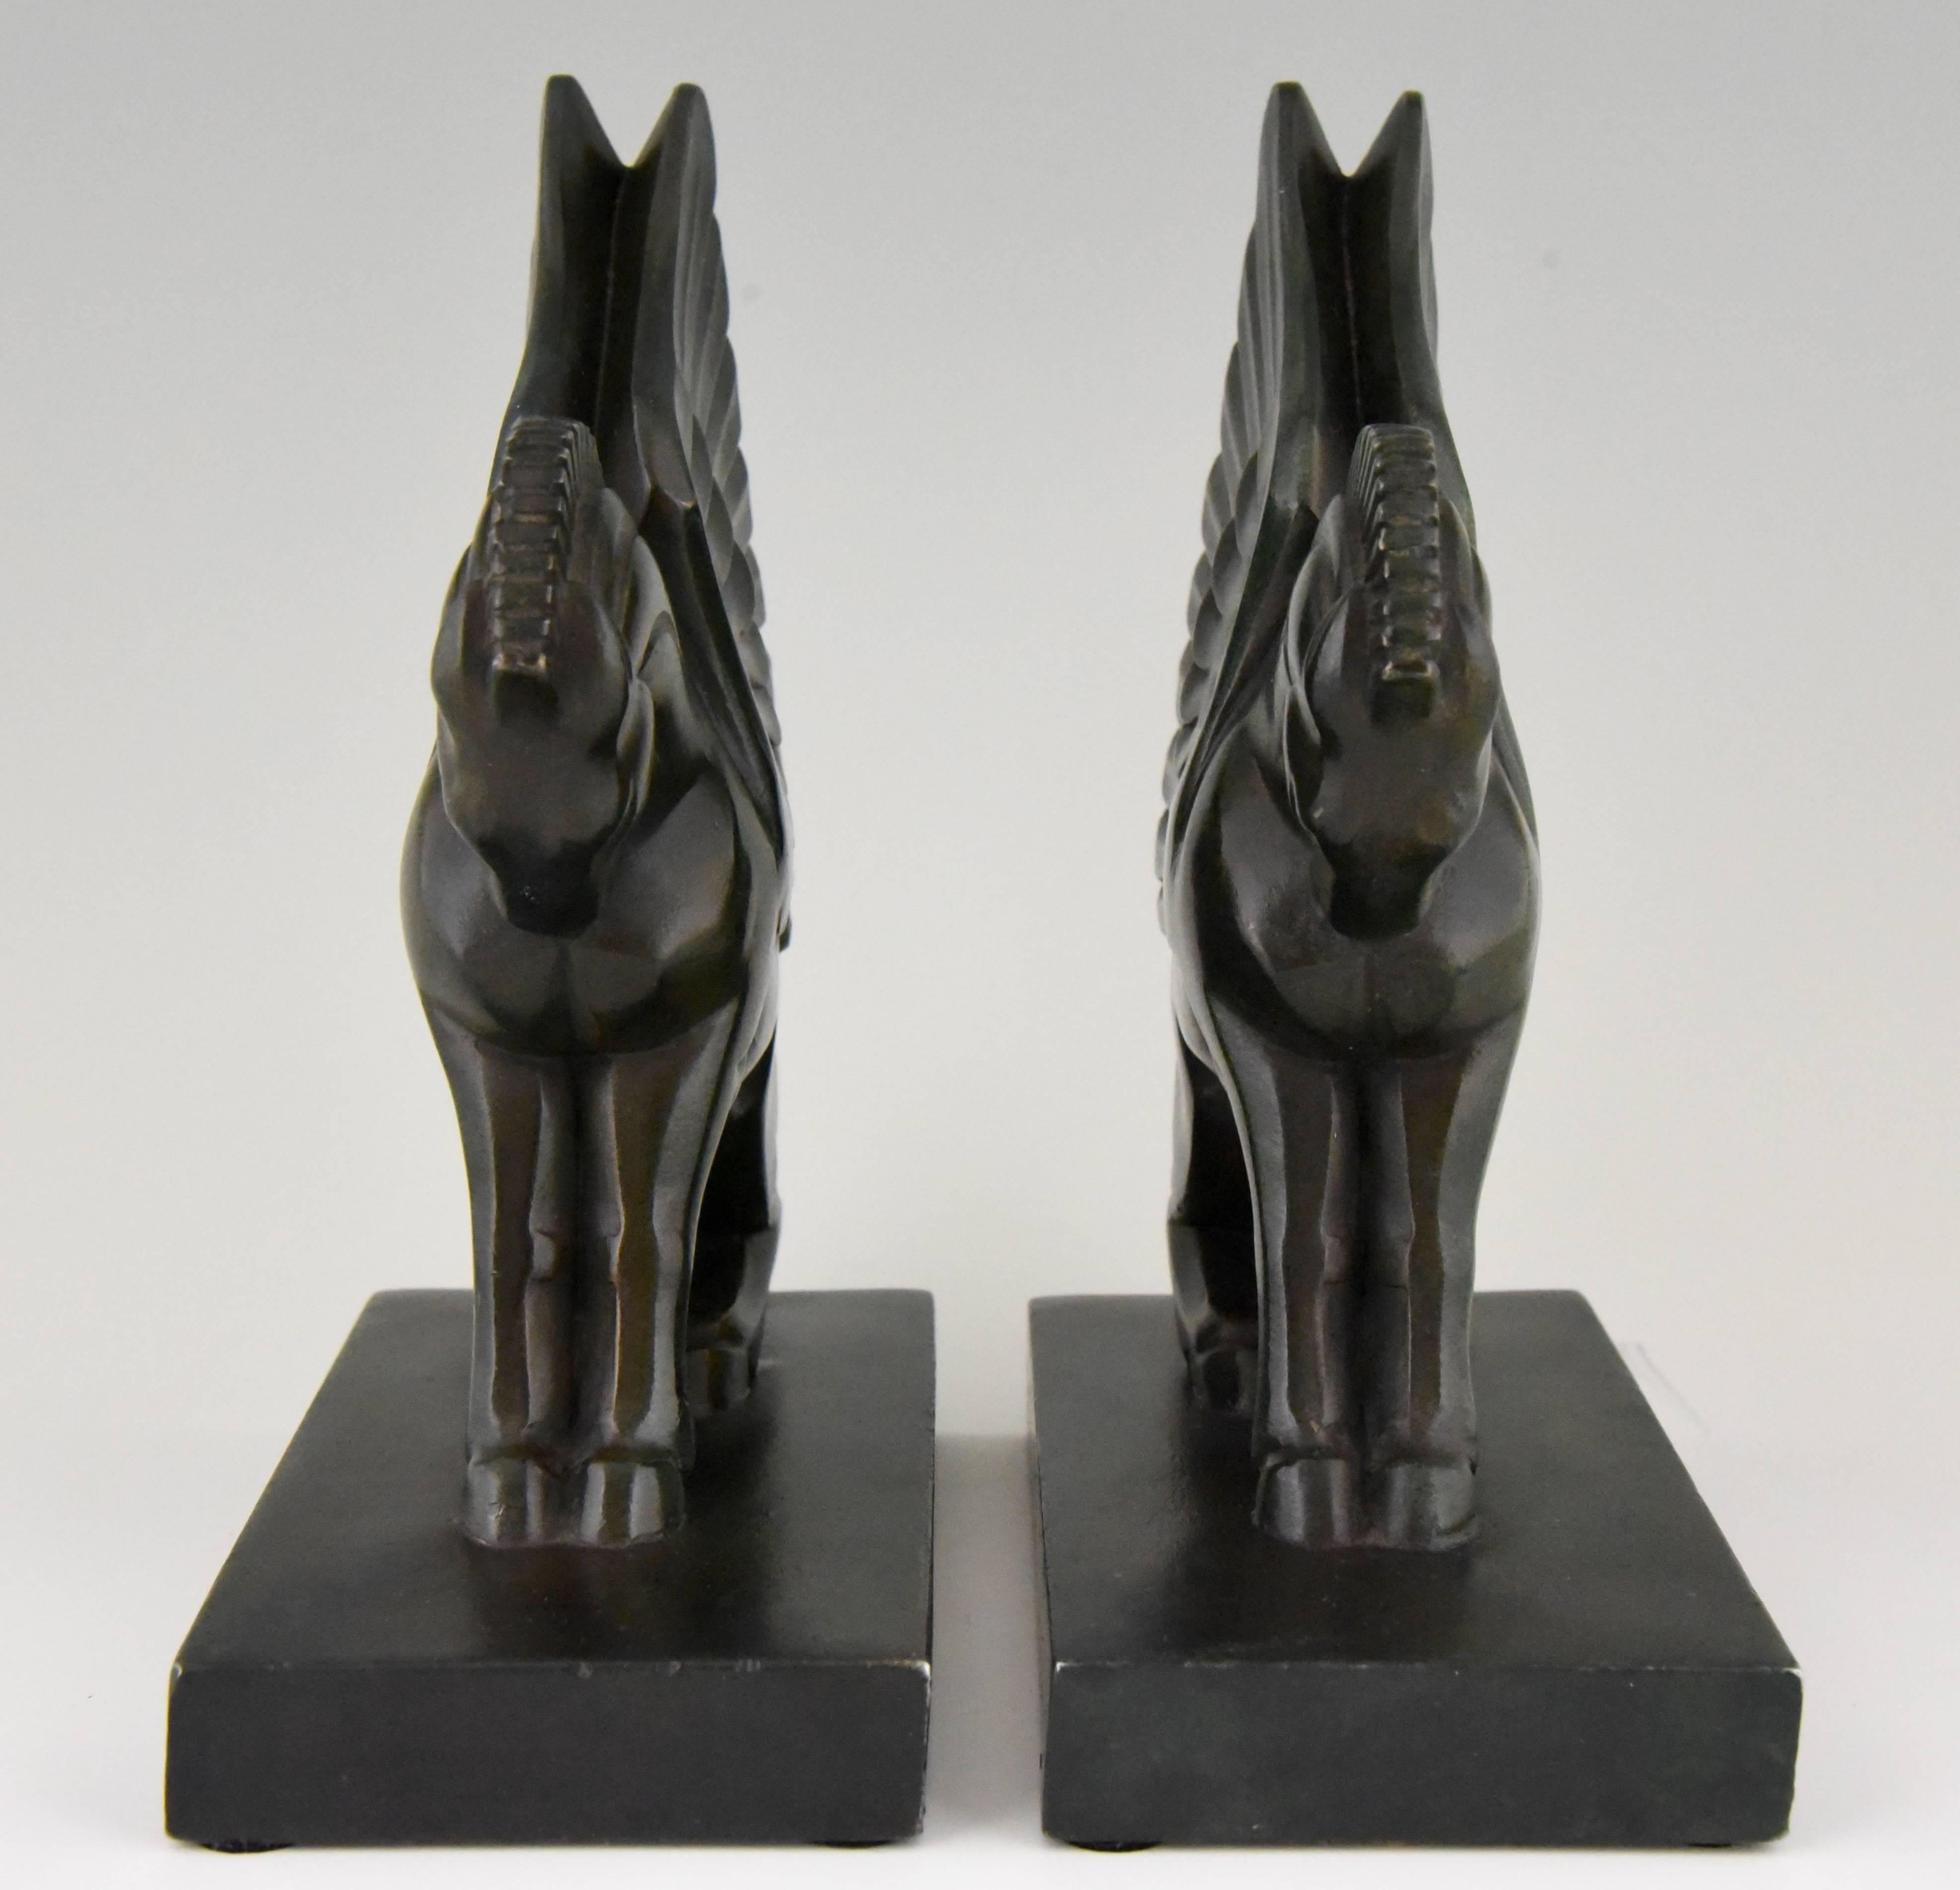 Patinated Art Deco Pagasus Winged Horse Bookends Georges H. Laurent, France, 1930